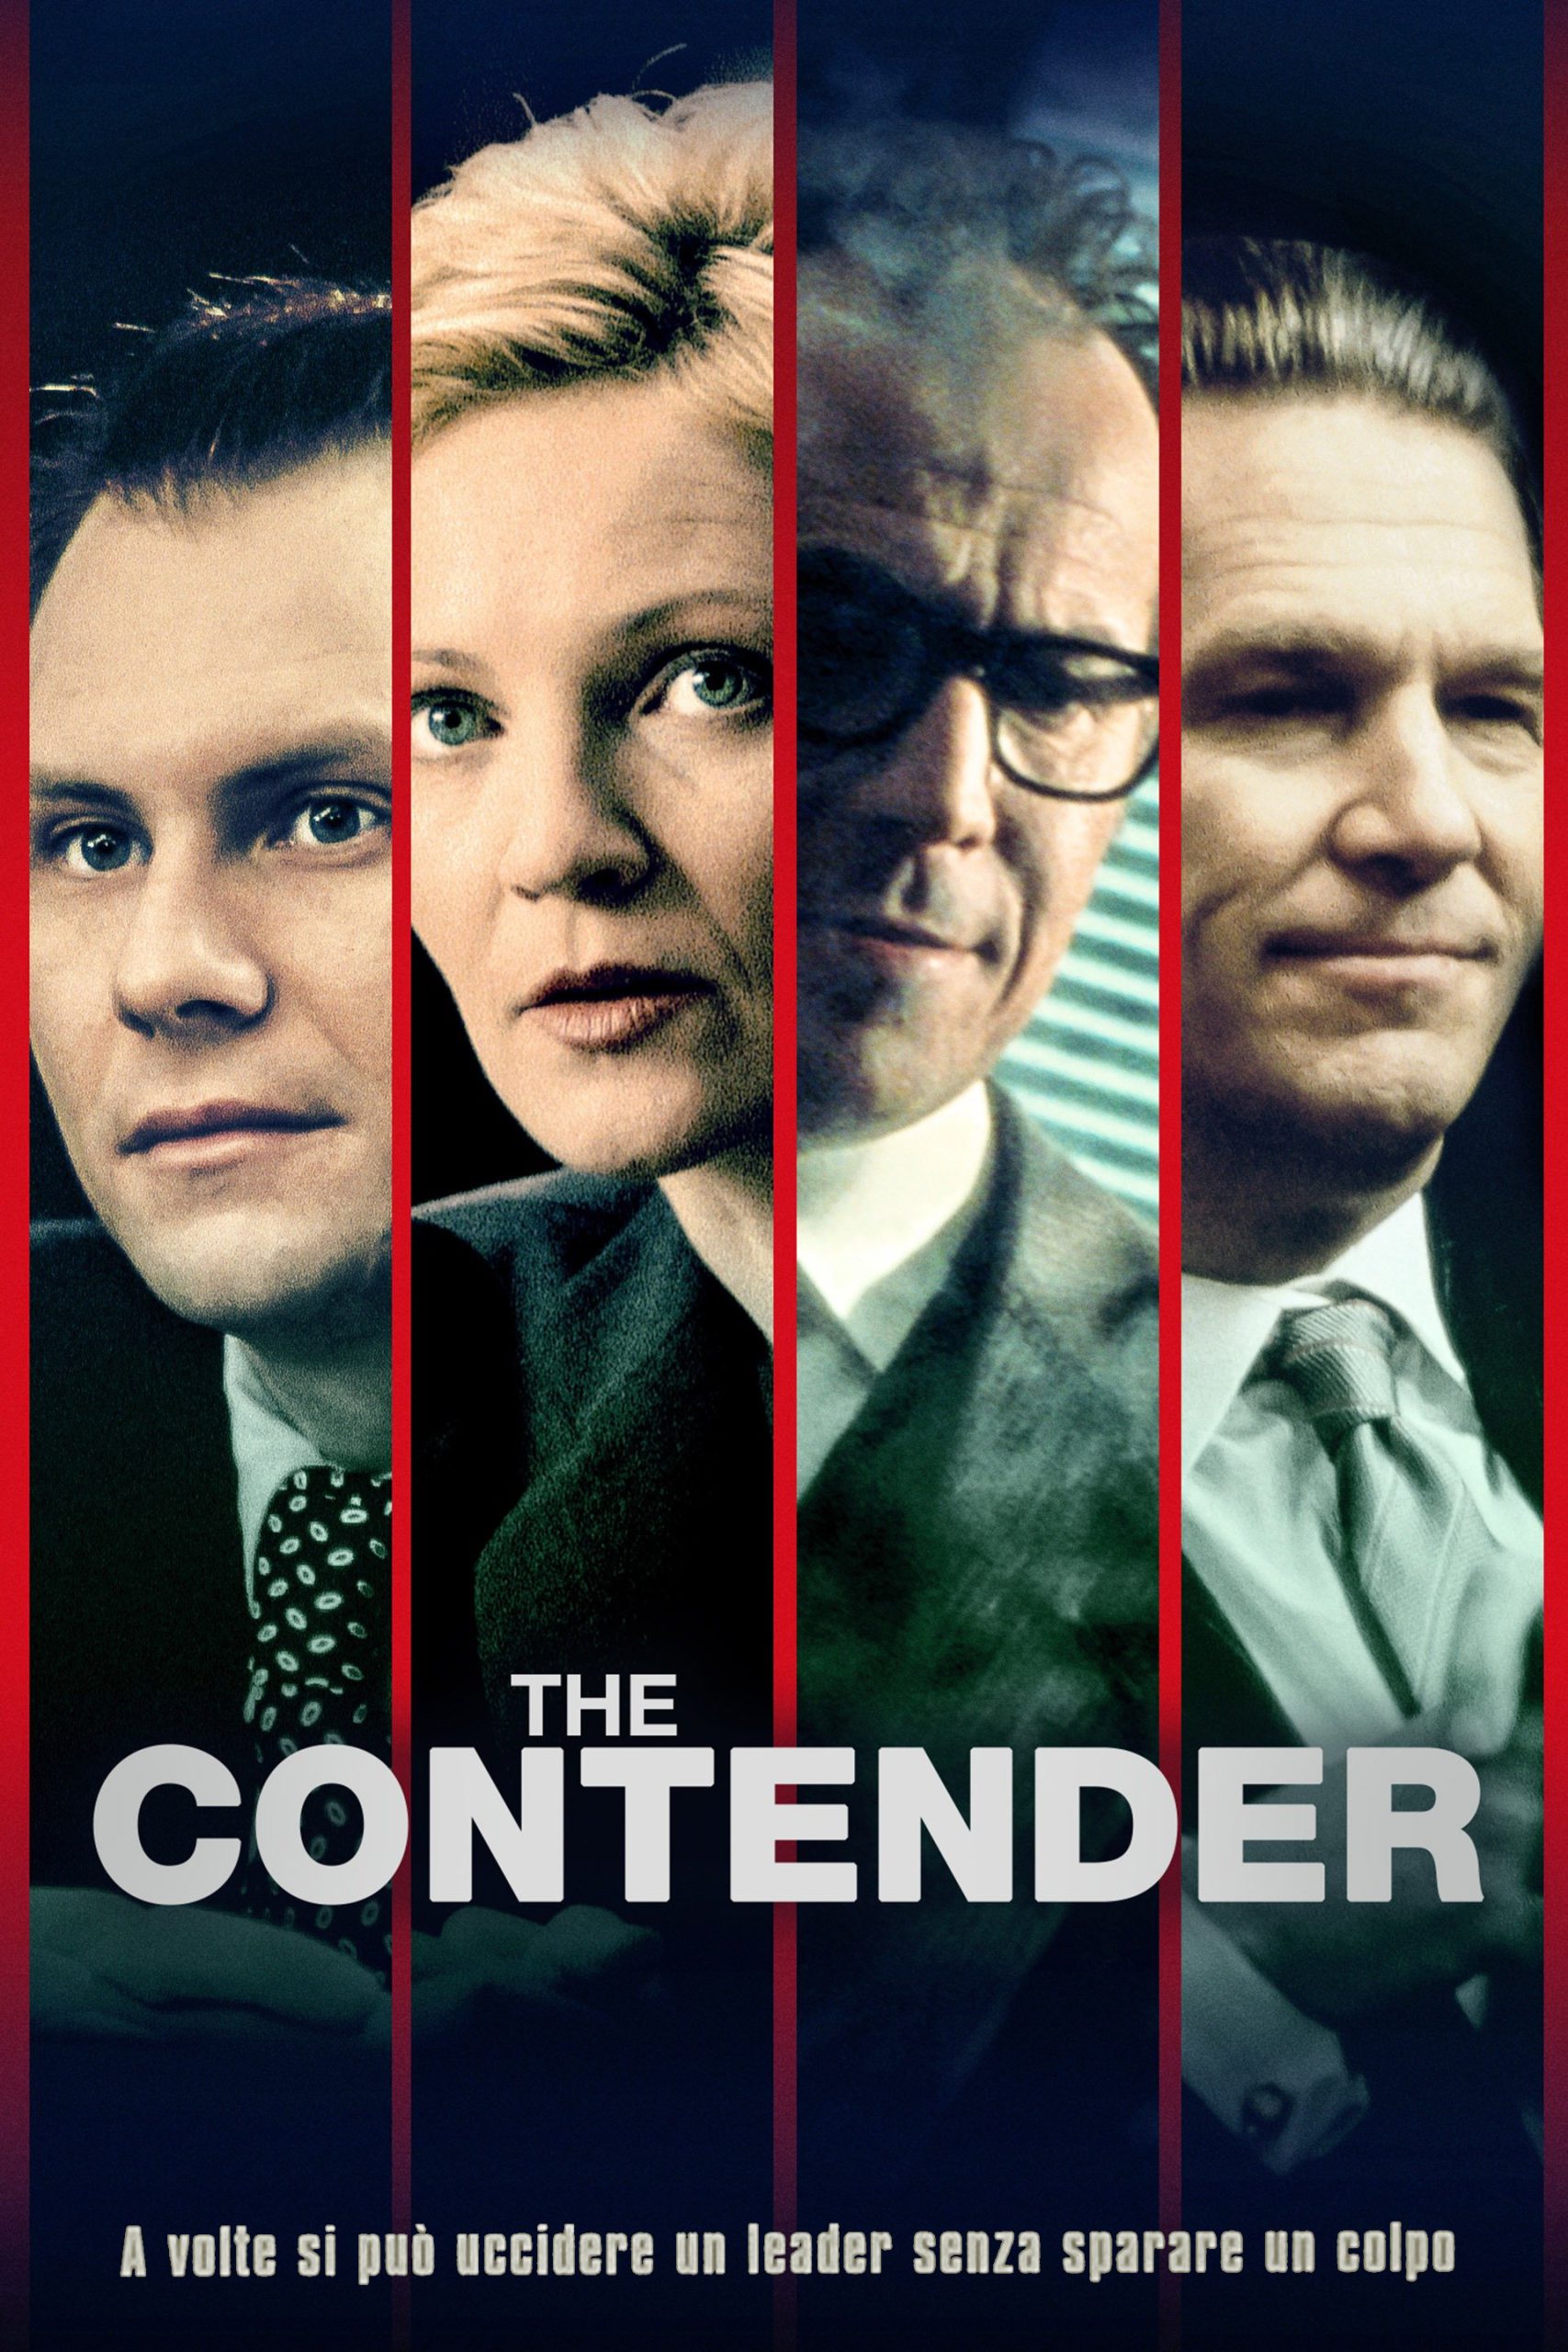 The Contender [HD] (2000)